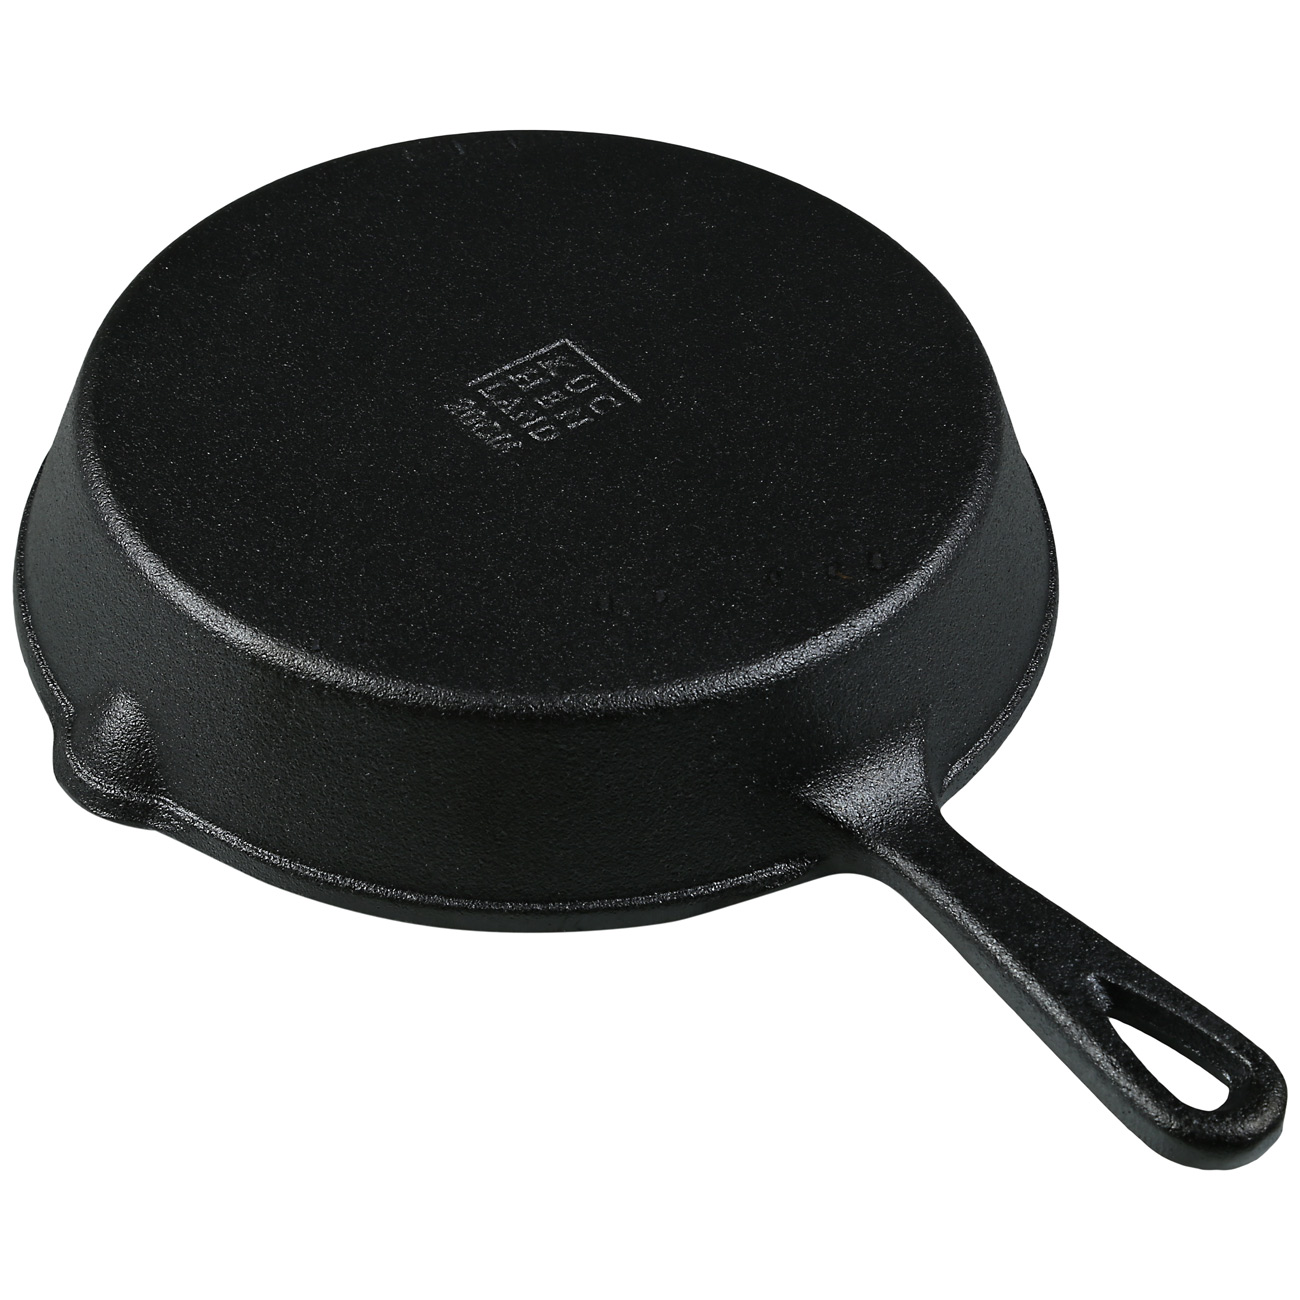 Frying Pan with base, 20 cm, cast iron/wood, round, black, Authentic изображение № 4